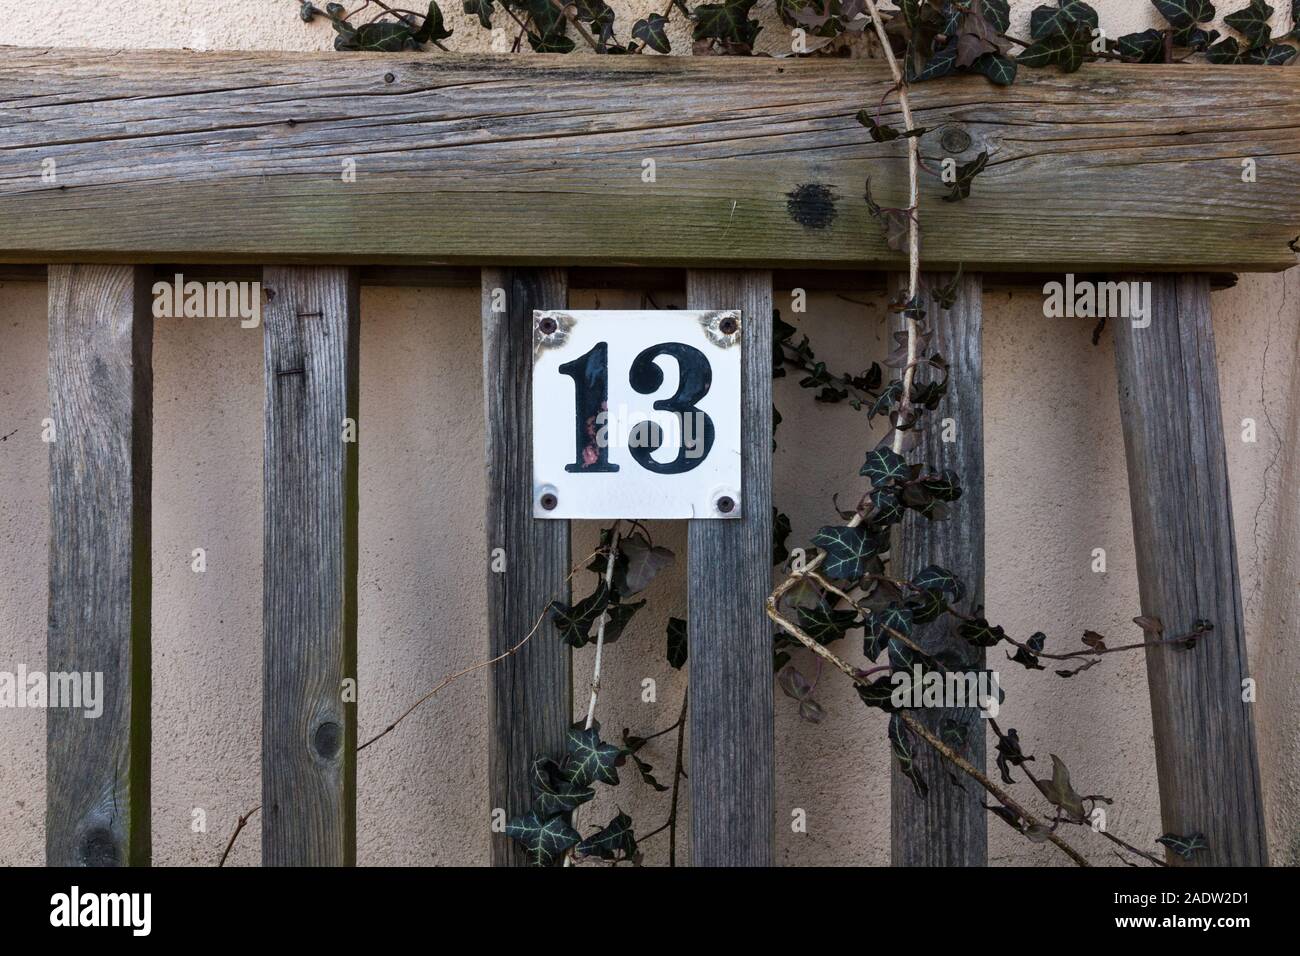 Friday 13 Icon High Resolution Stock Photography and Images - Alamy